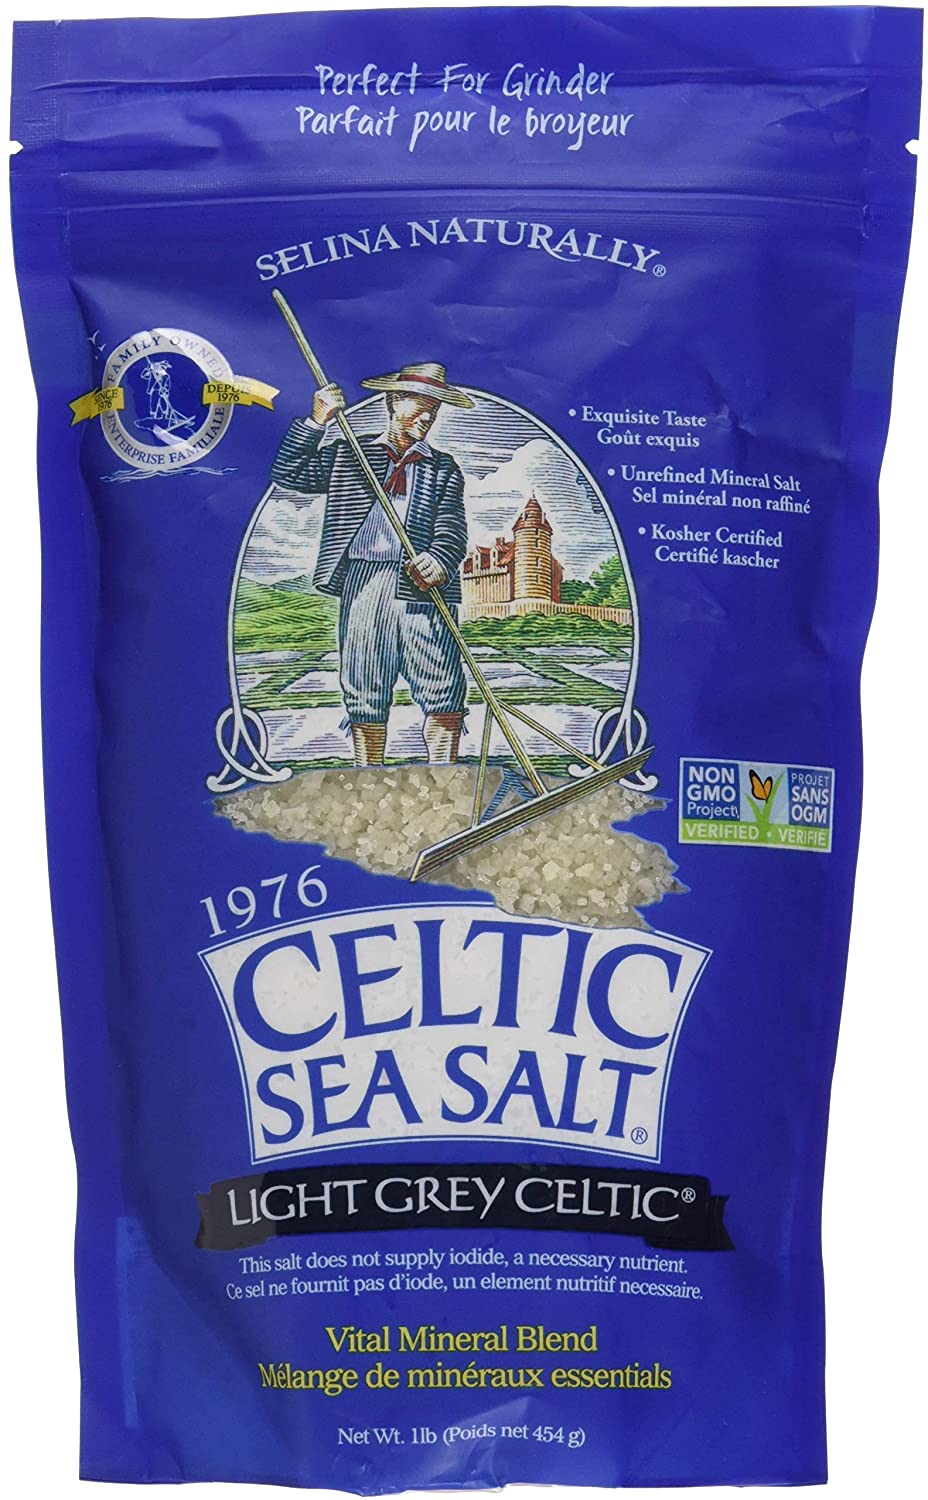 Celtic Sea Salt Light Grey 1 Pound Resealable Bag – Additive-Free, Delicious Sea Salt, Perfect for Cooking, Baking and More - Gluten-Free, Non-GMO Verified, Kosher and Paleo-Friendly